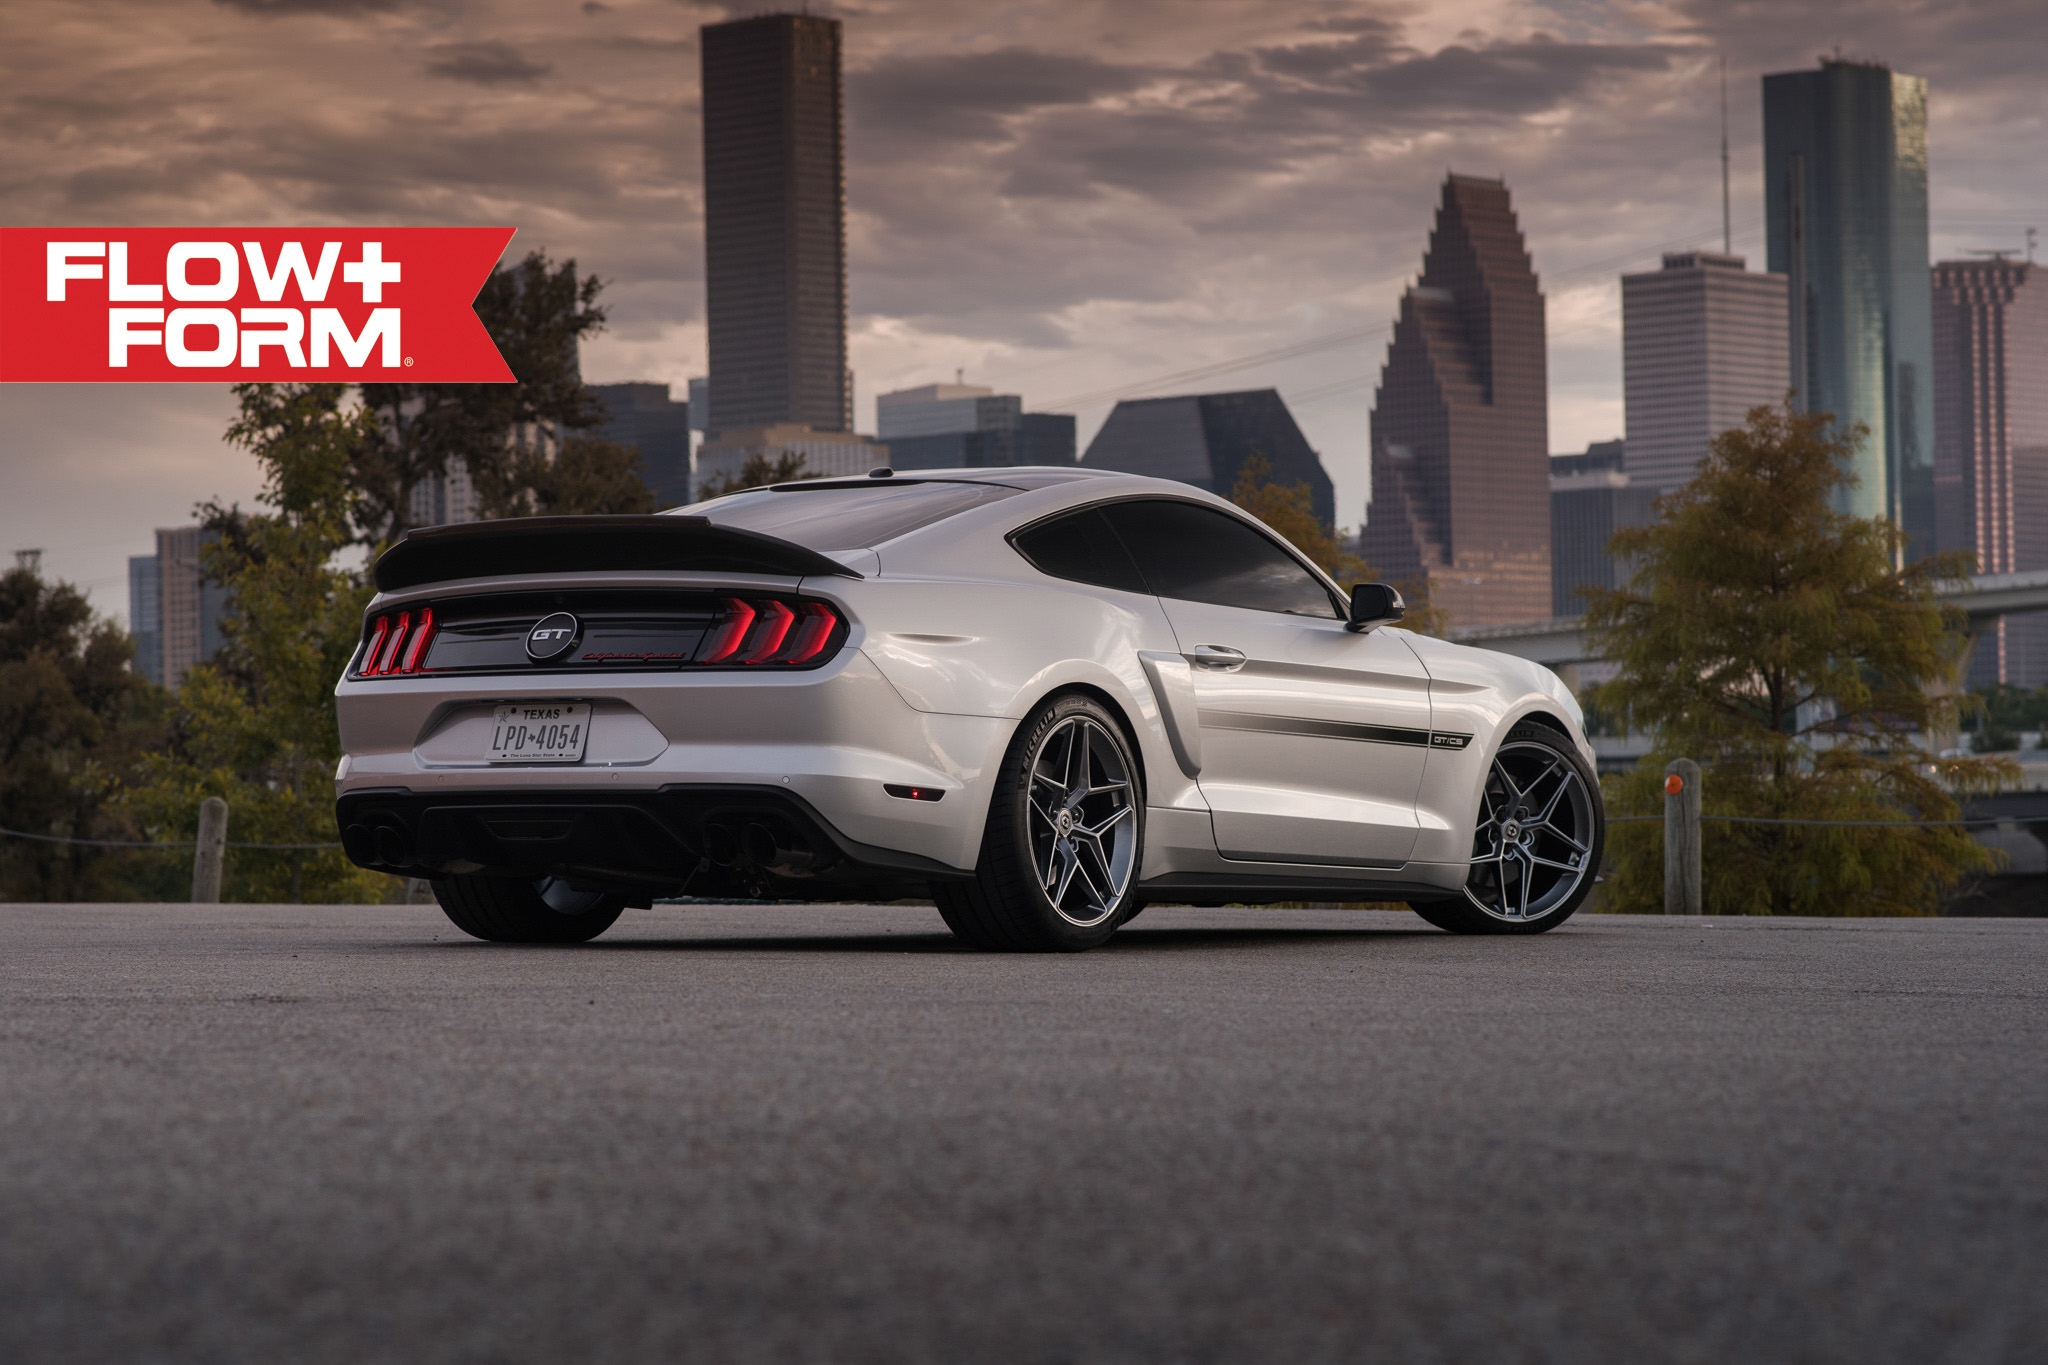 S650 Mustang Authorized HRE Wheels Dealer: Flow Form and Forged Series Wheels For Mustang S650 1